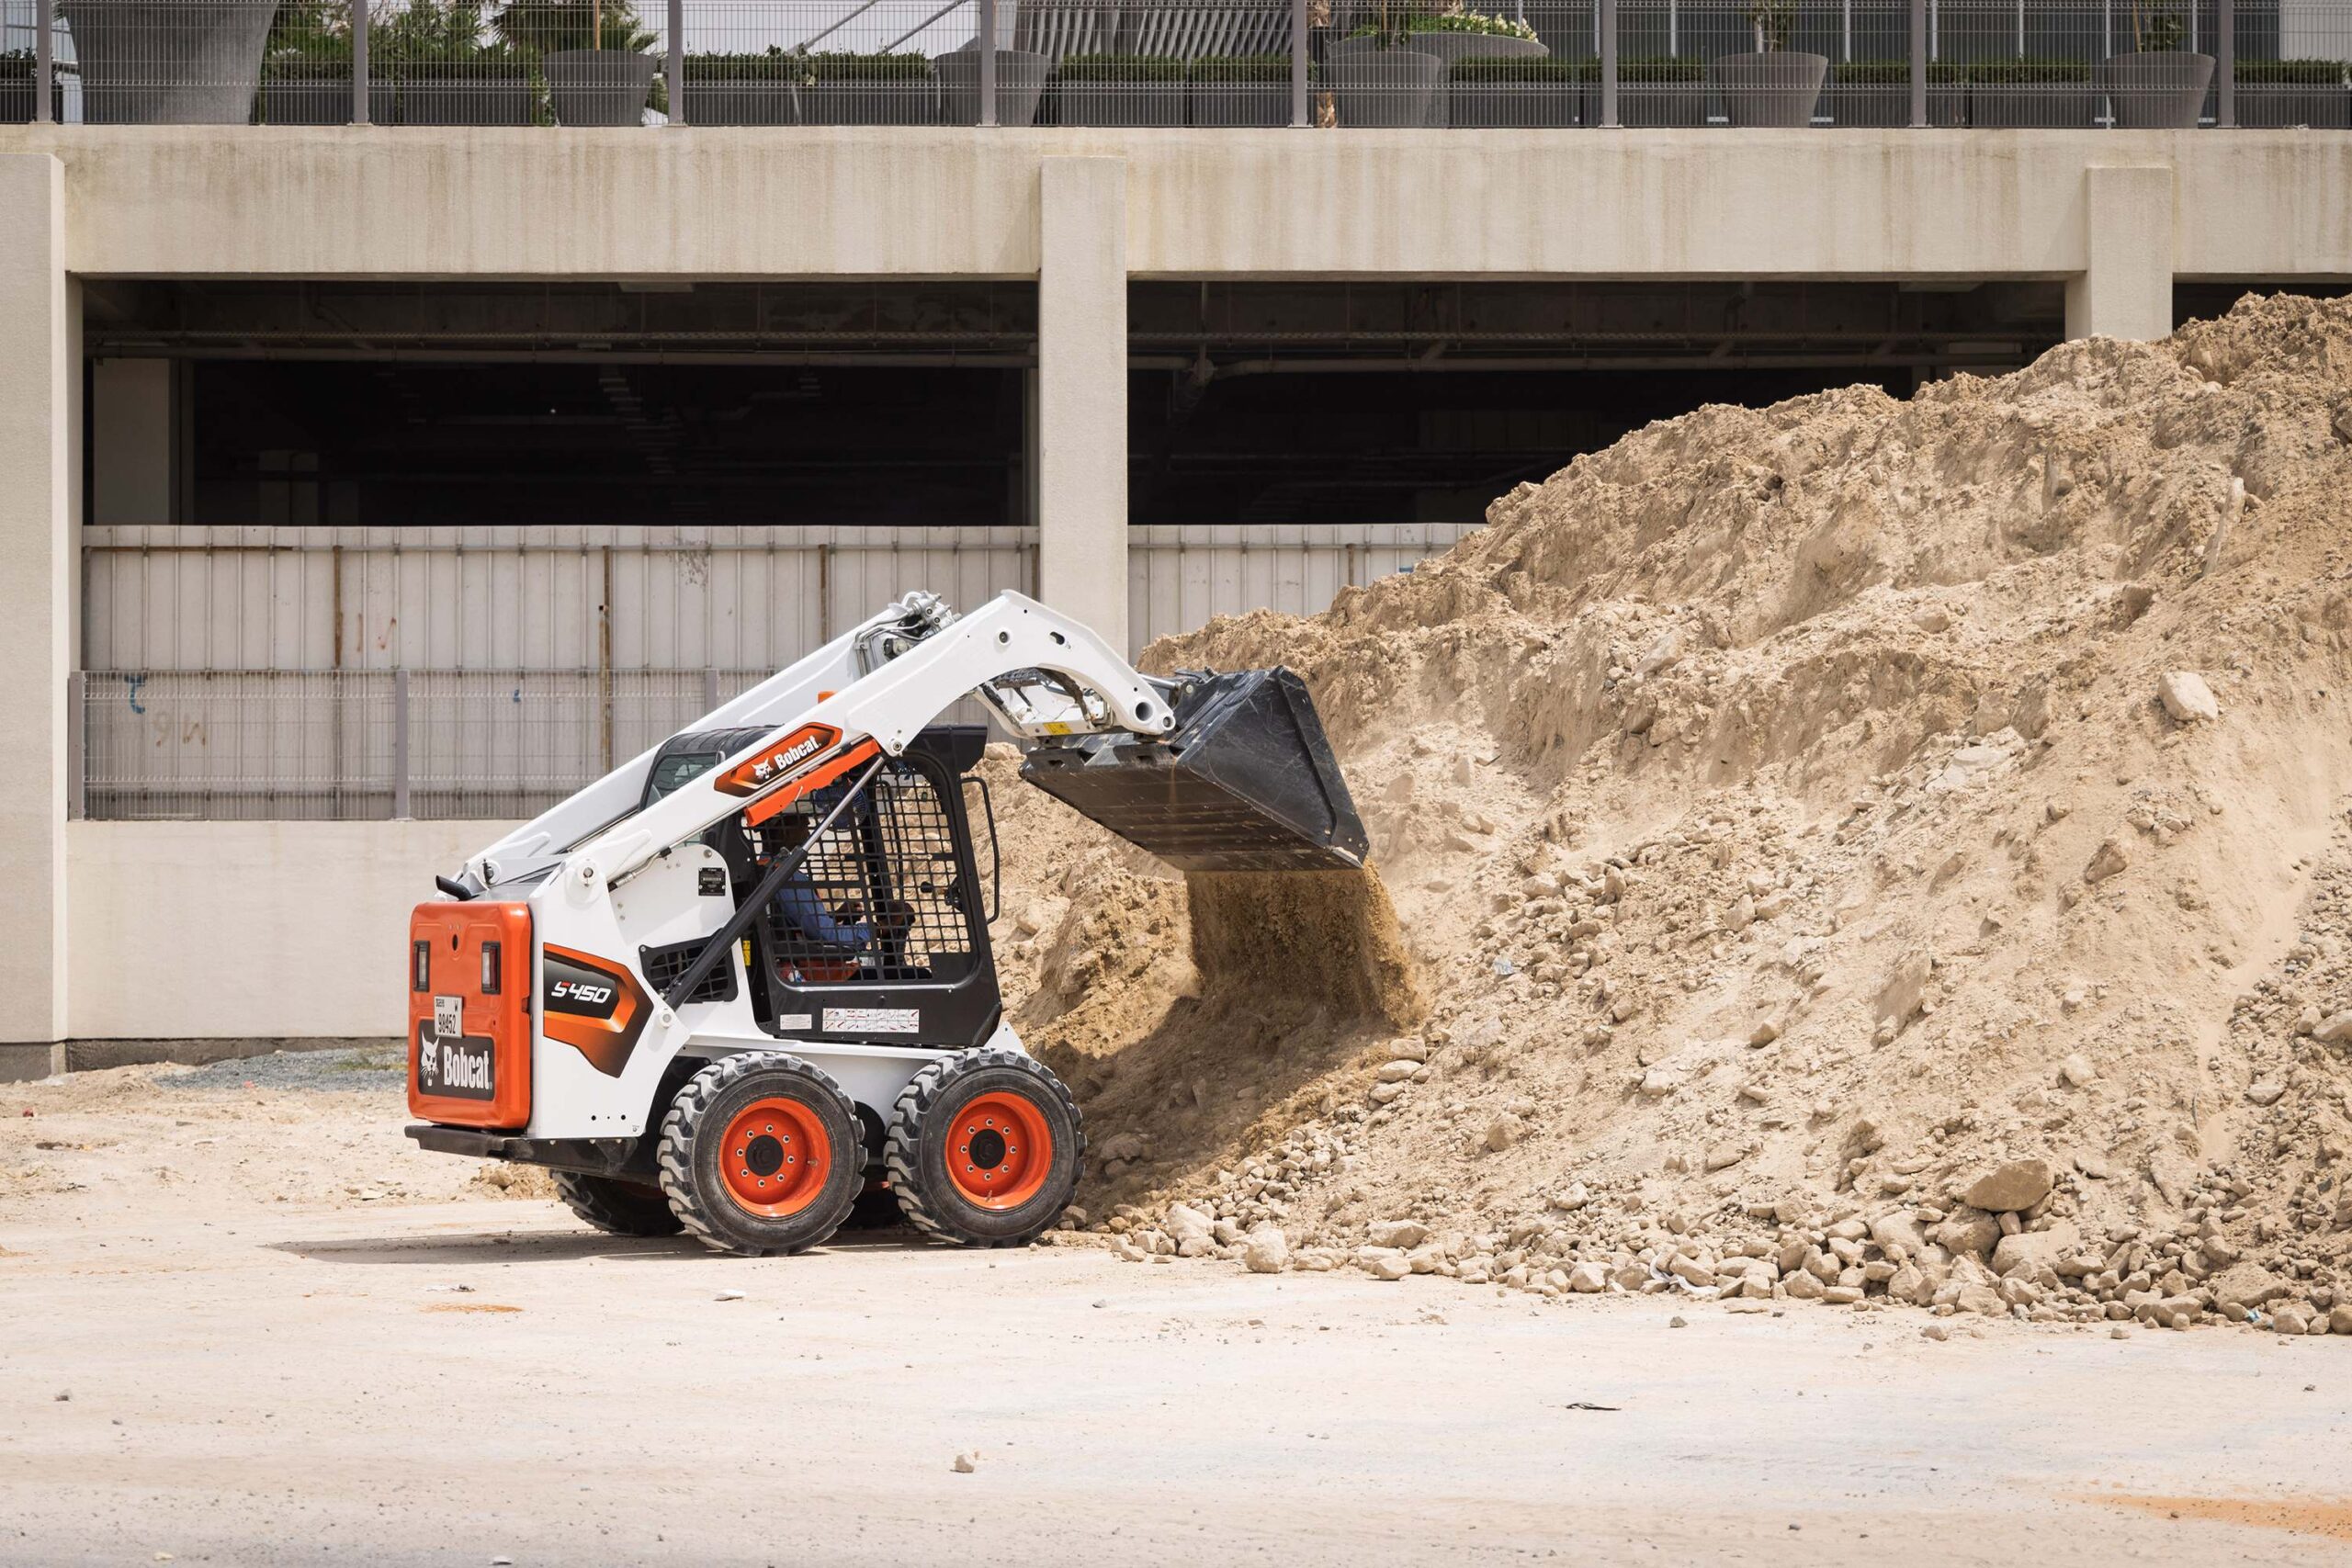 The new S450 builds on Bobcat’s well proven track record for very reliable equipment and maximum uptime.